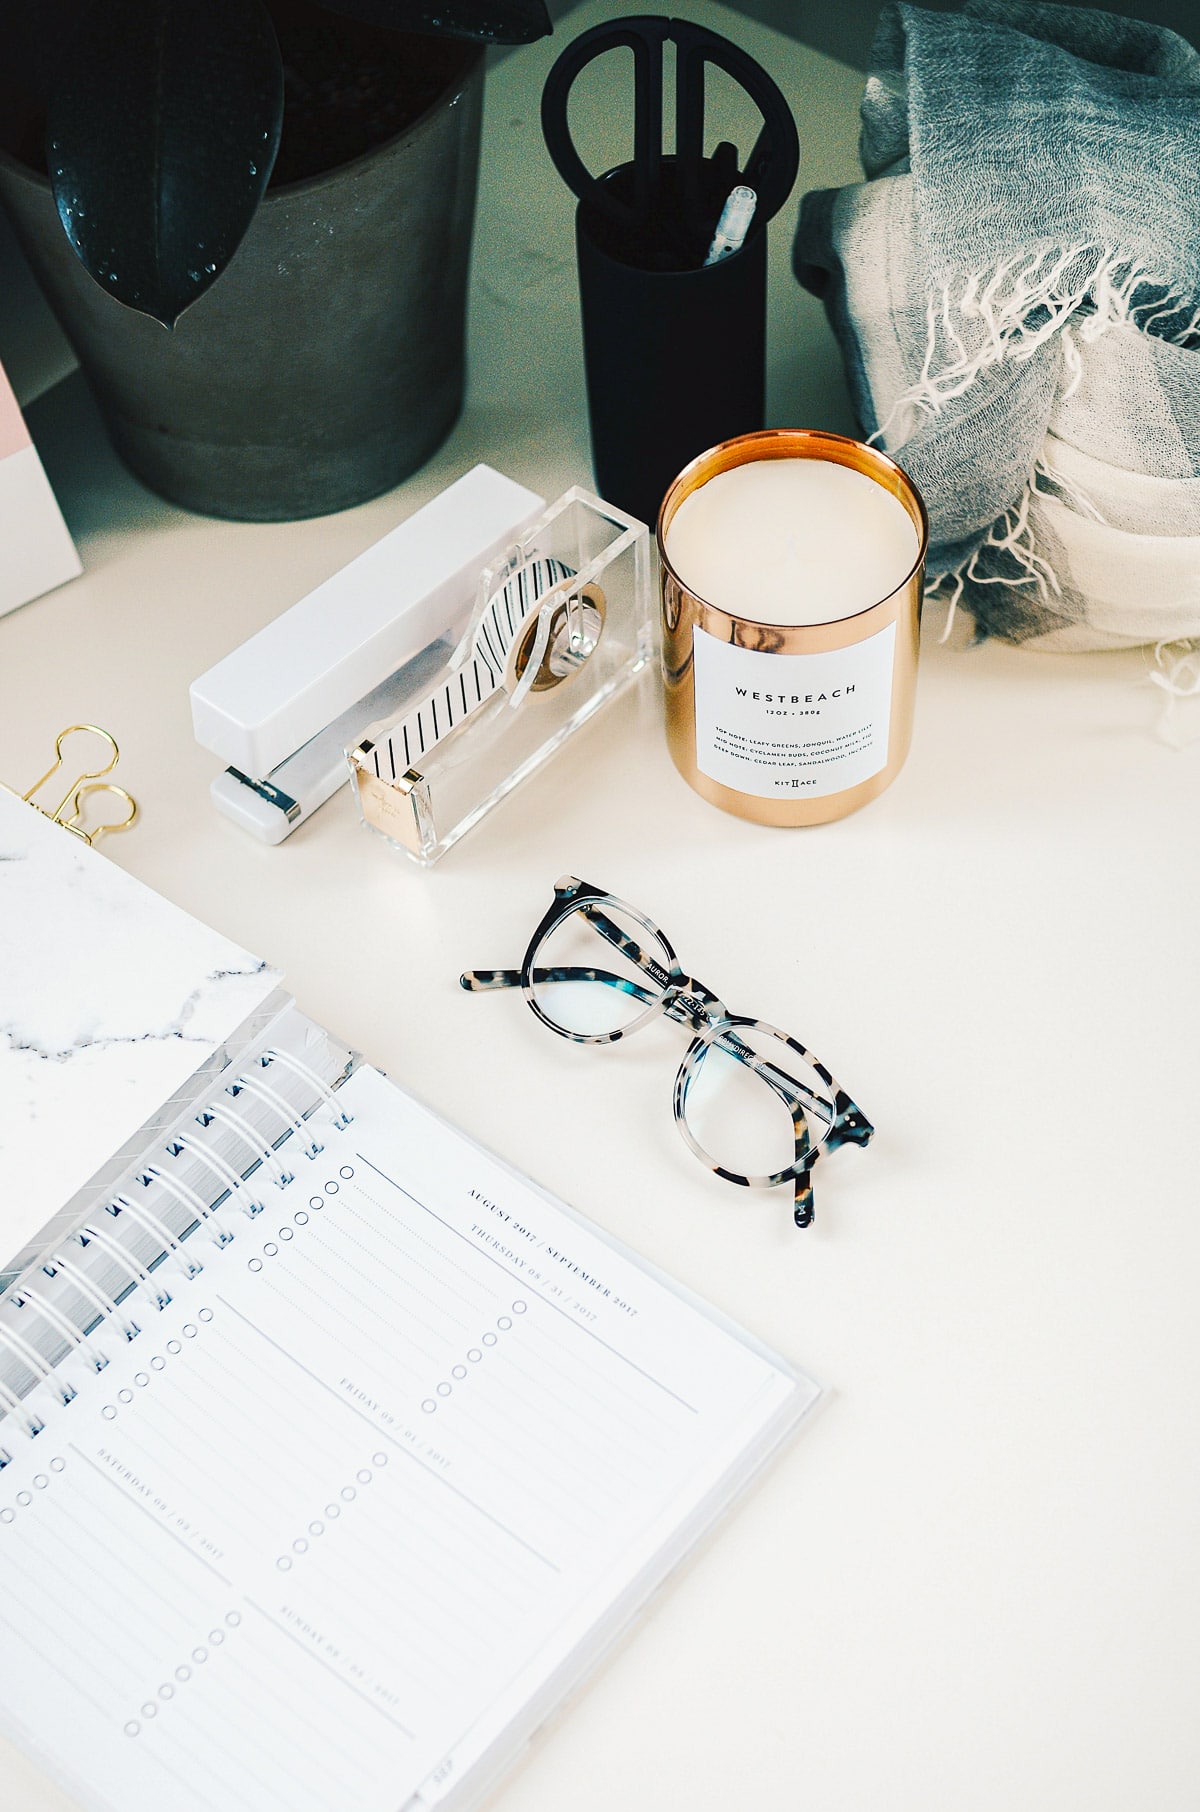 Desk with a calendar, glasses and office supplies